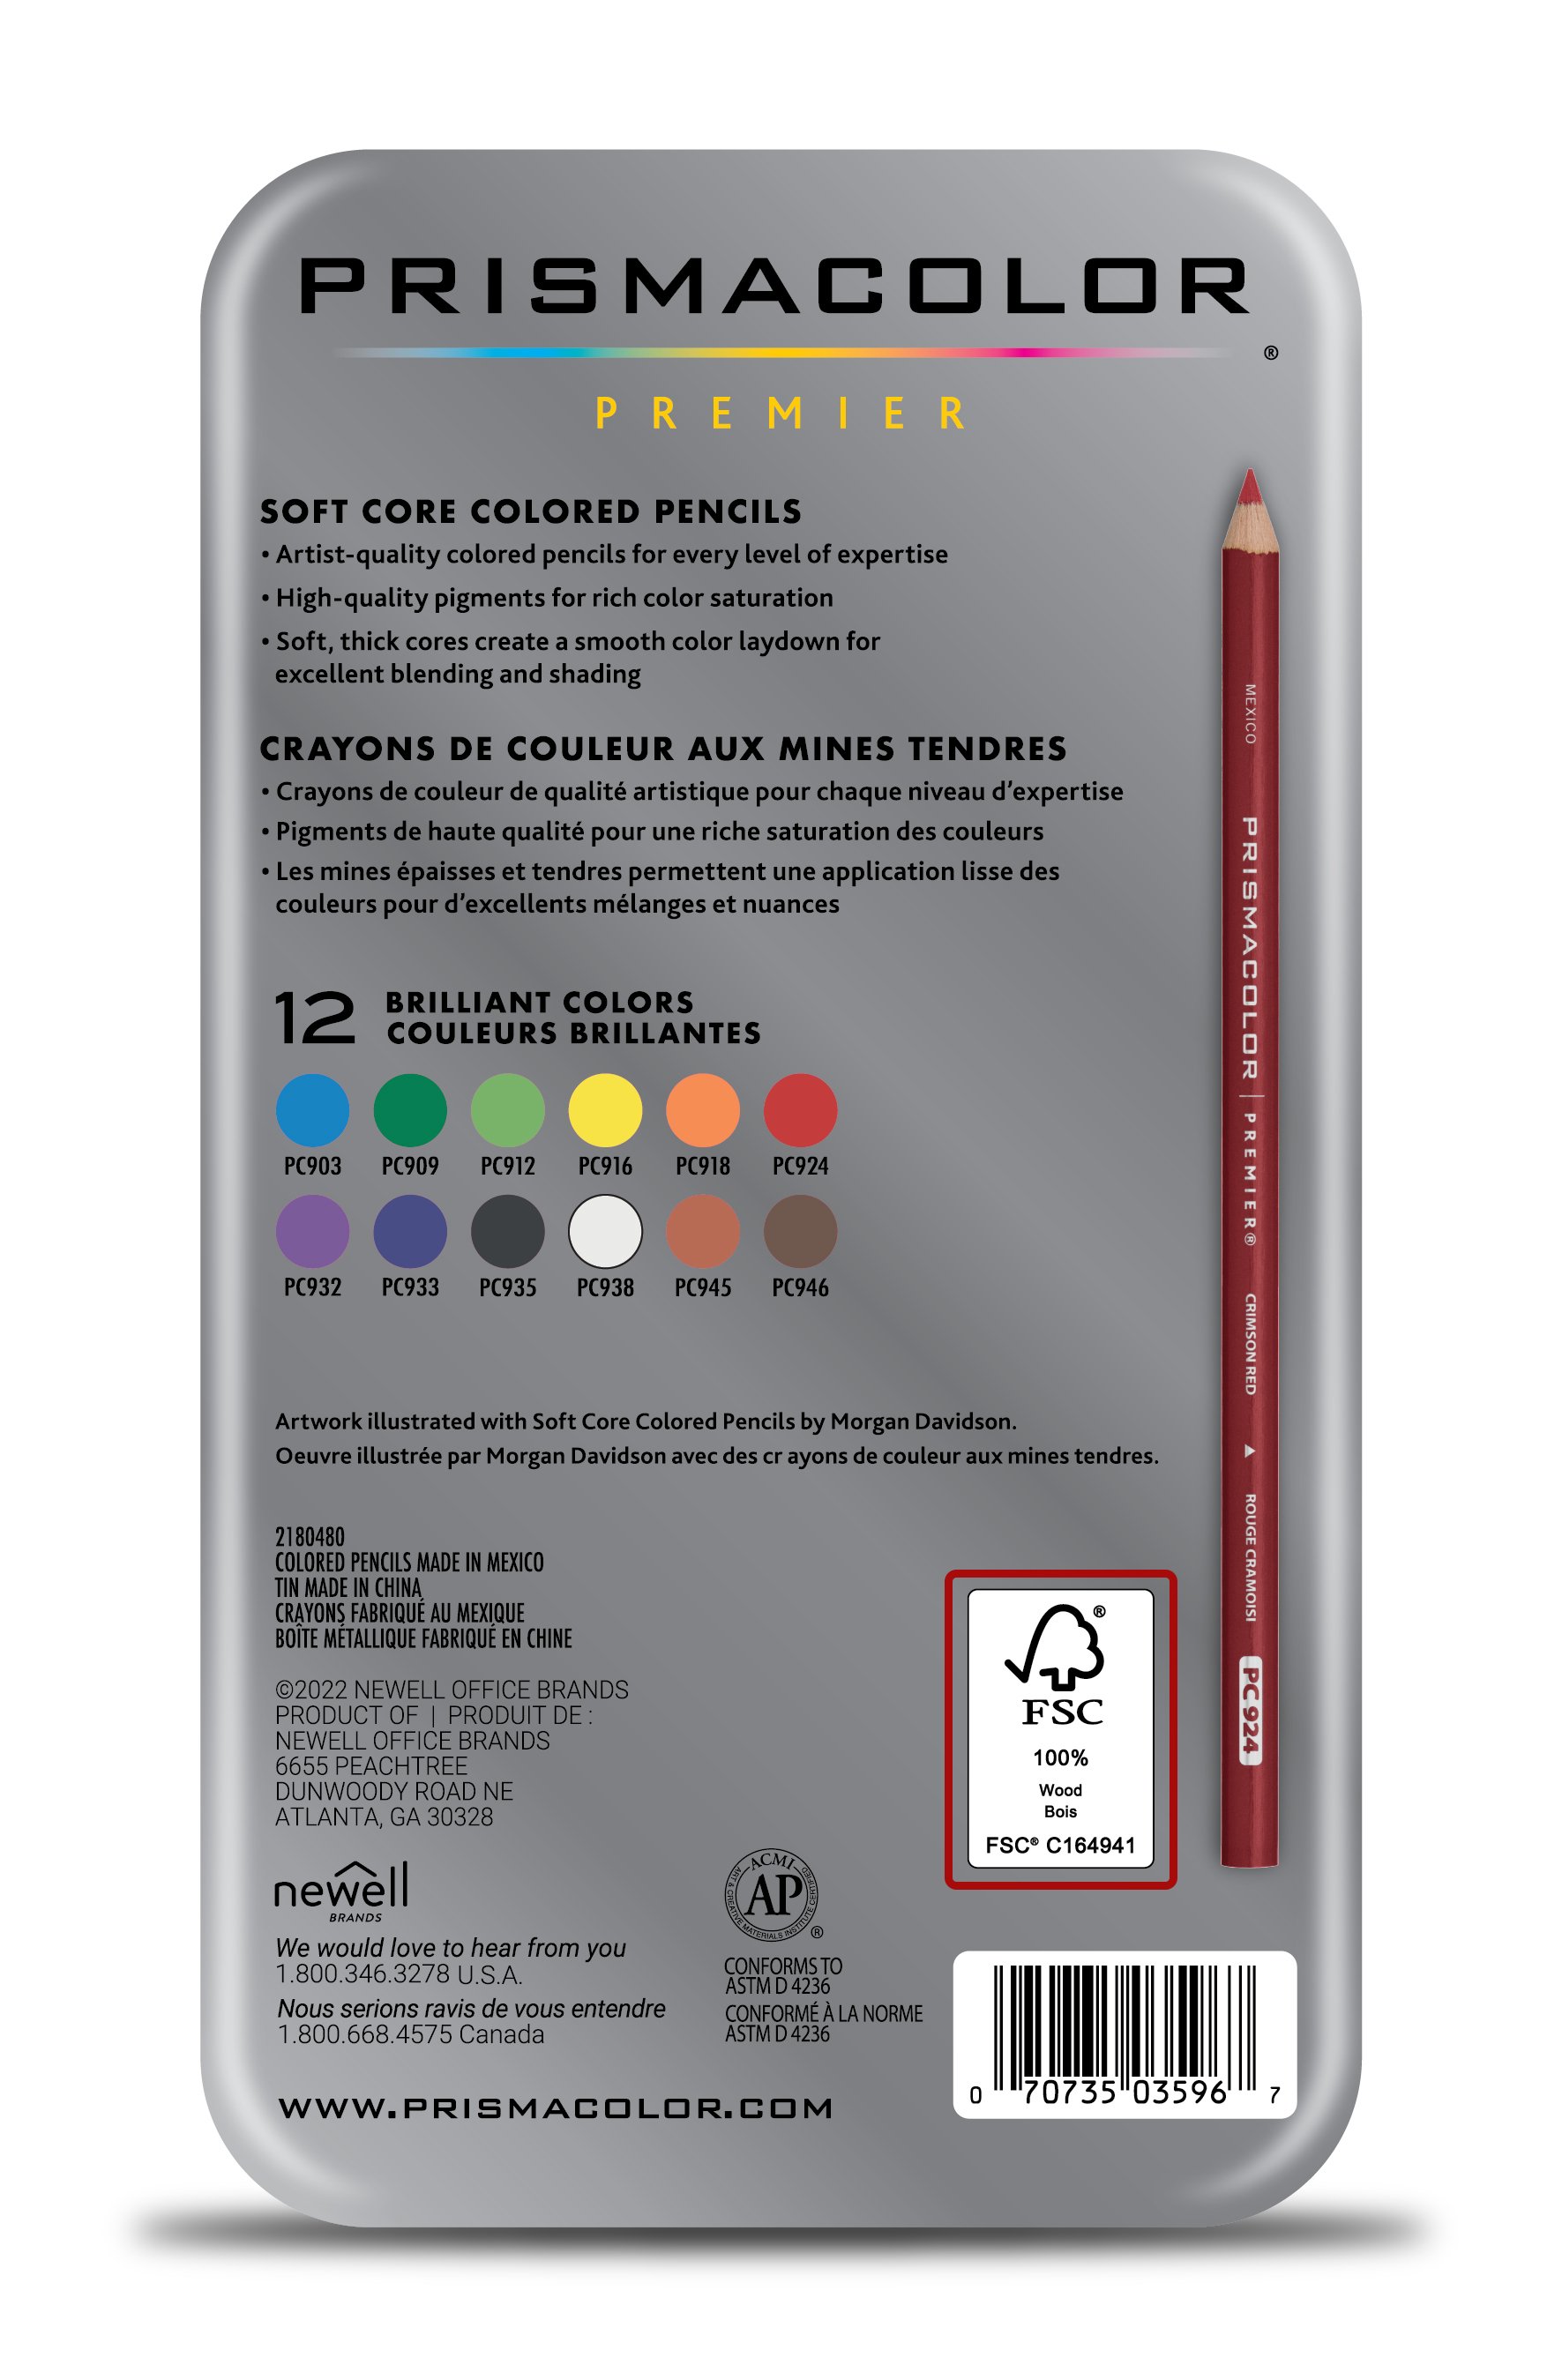 Frequently Asked Questions | PRISMACOLOR